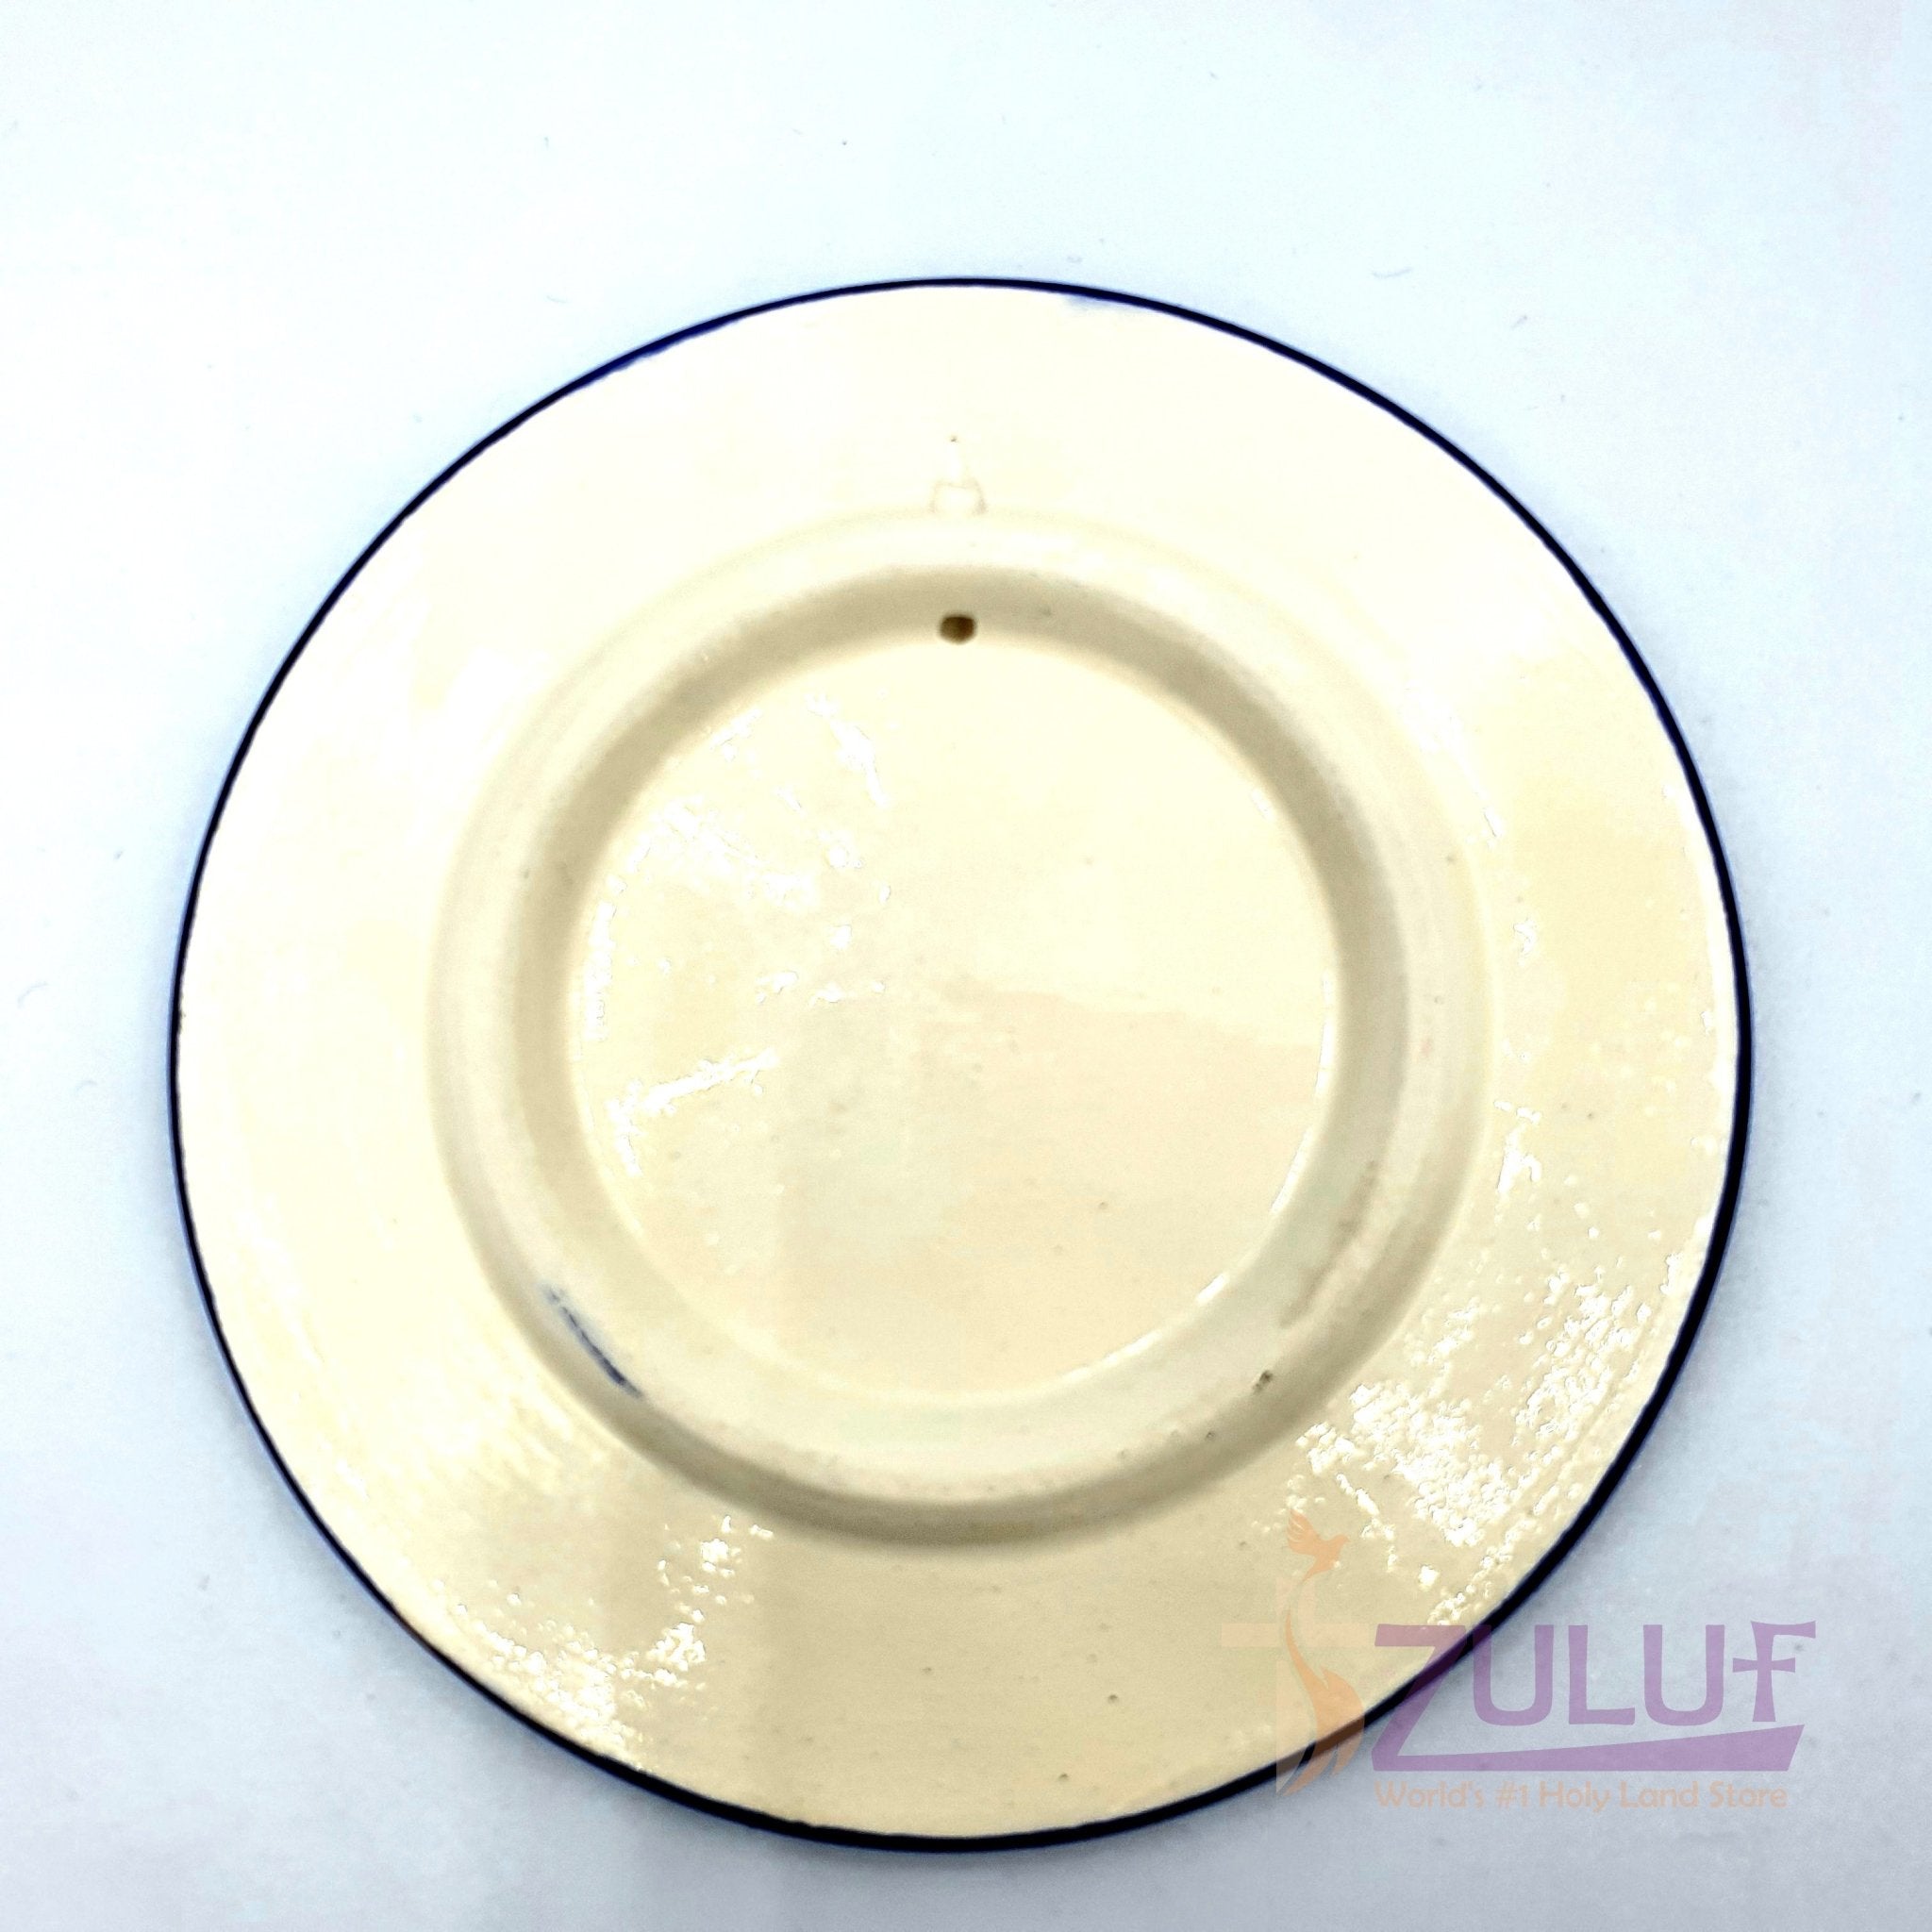 Hand Made Small Size Ceramic Plate by Zuluf 9cm / 3.5" - CER011 - Zuluf